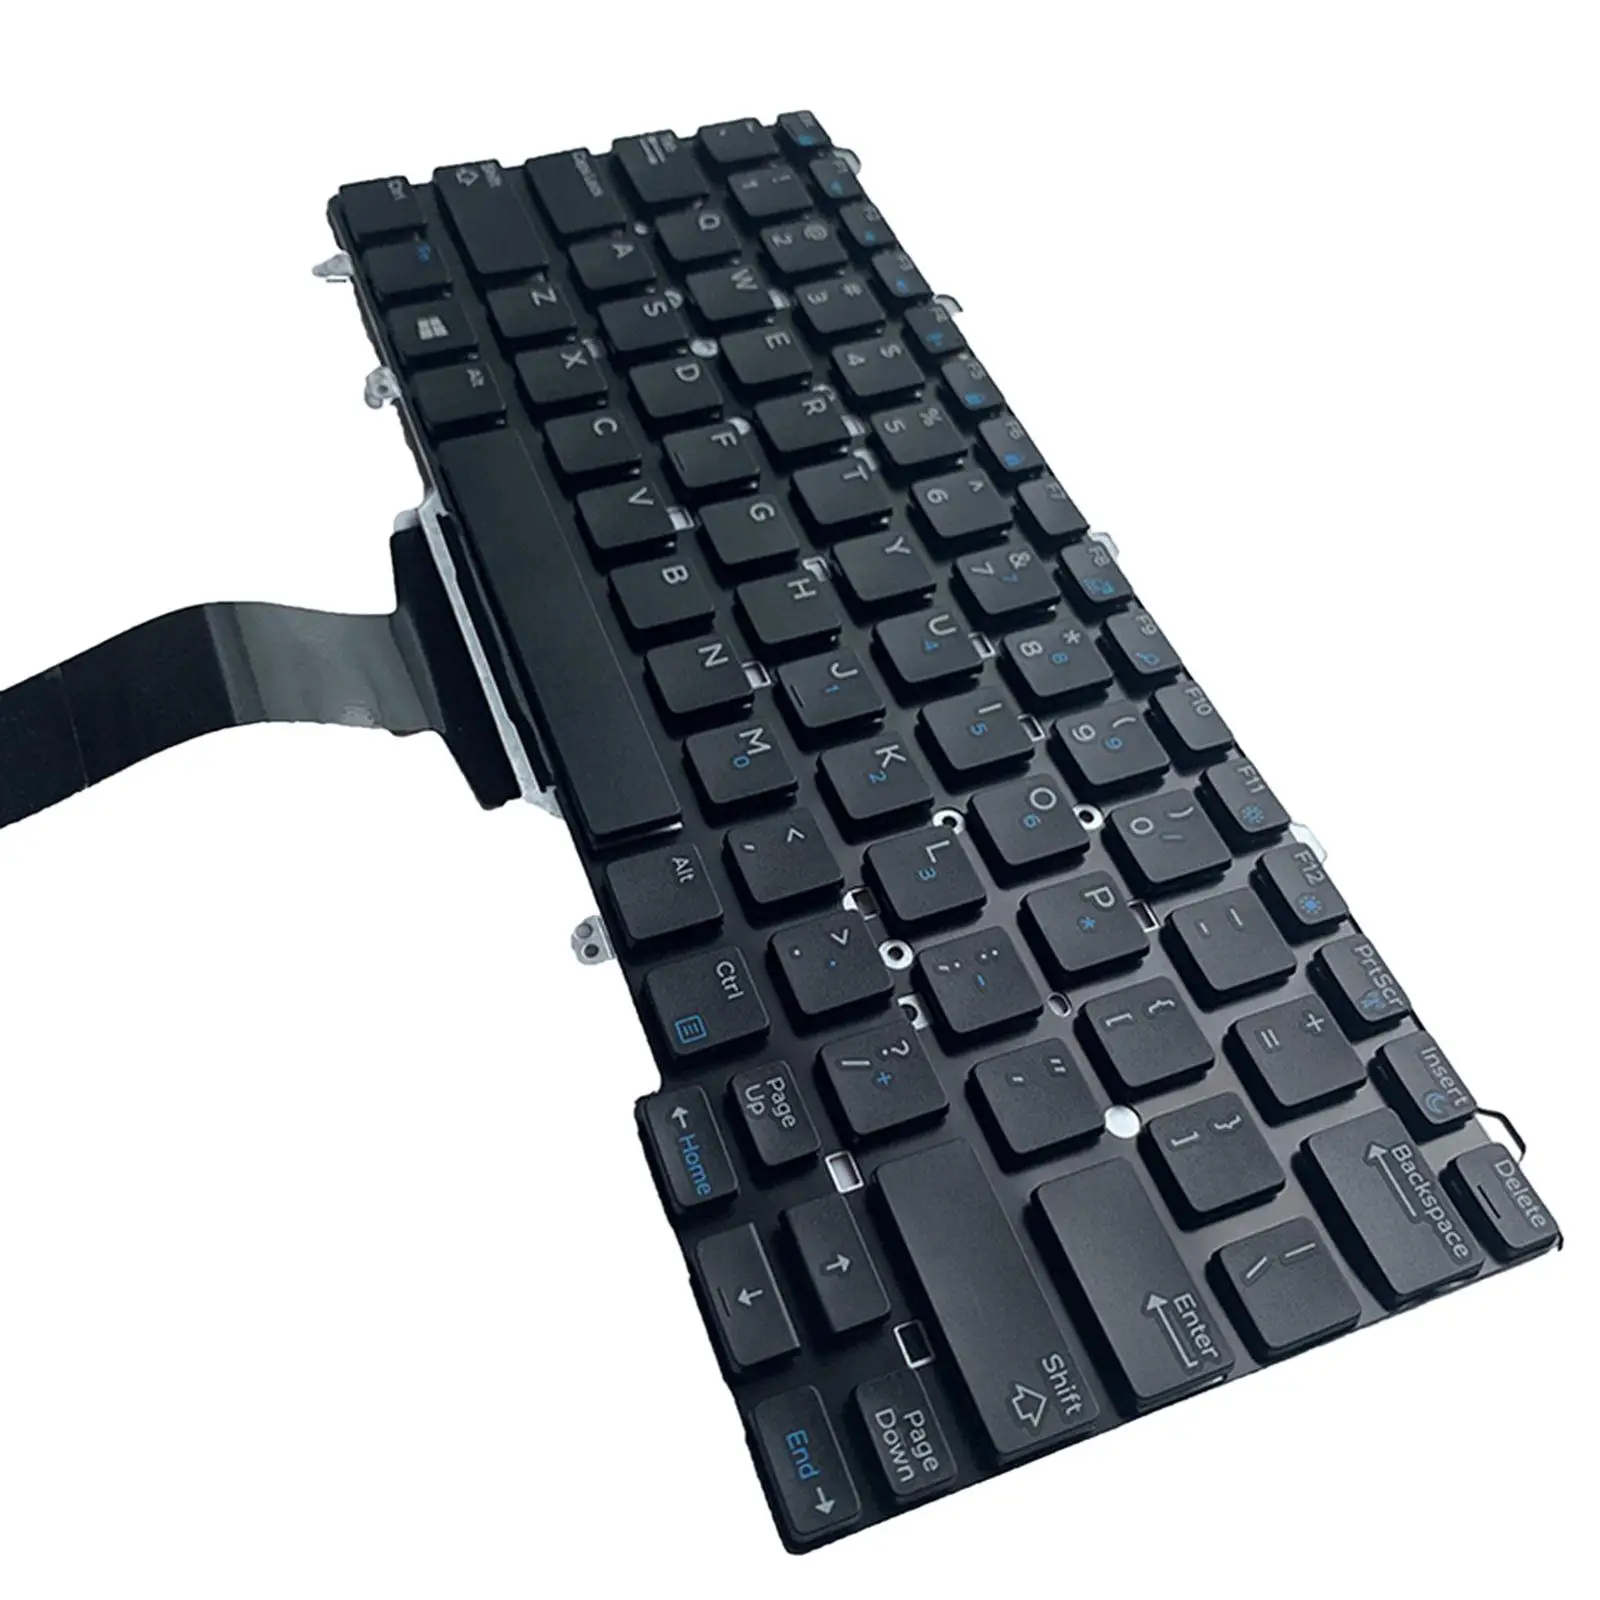 Laptop Keyboard US Layout Notebook ABS Keyboard Replacement for Dell Latitude 3340 3350 E3340 E5450 E7470 0VW6J9 SN7230